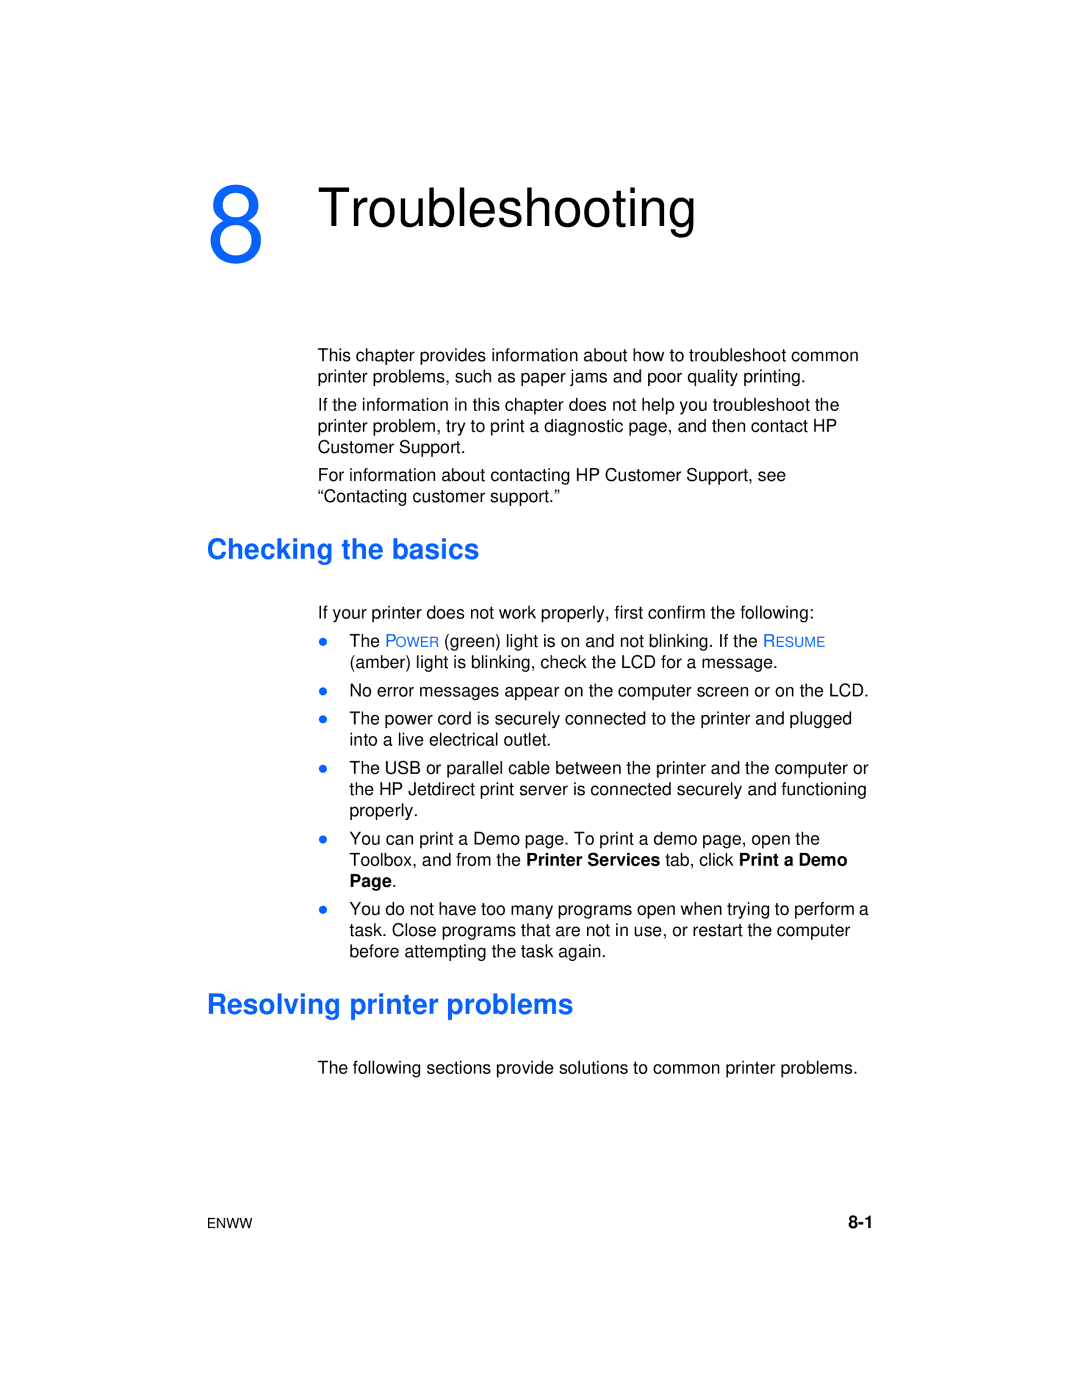 HP Color Inkjet cp1700 manual Troubleshooting, Checking the basics, Resolving printer problems 